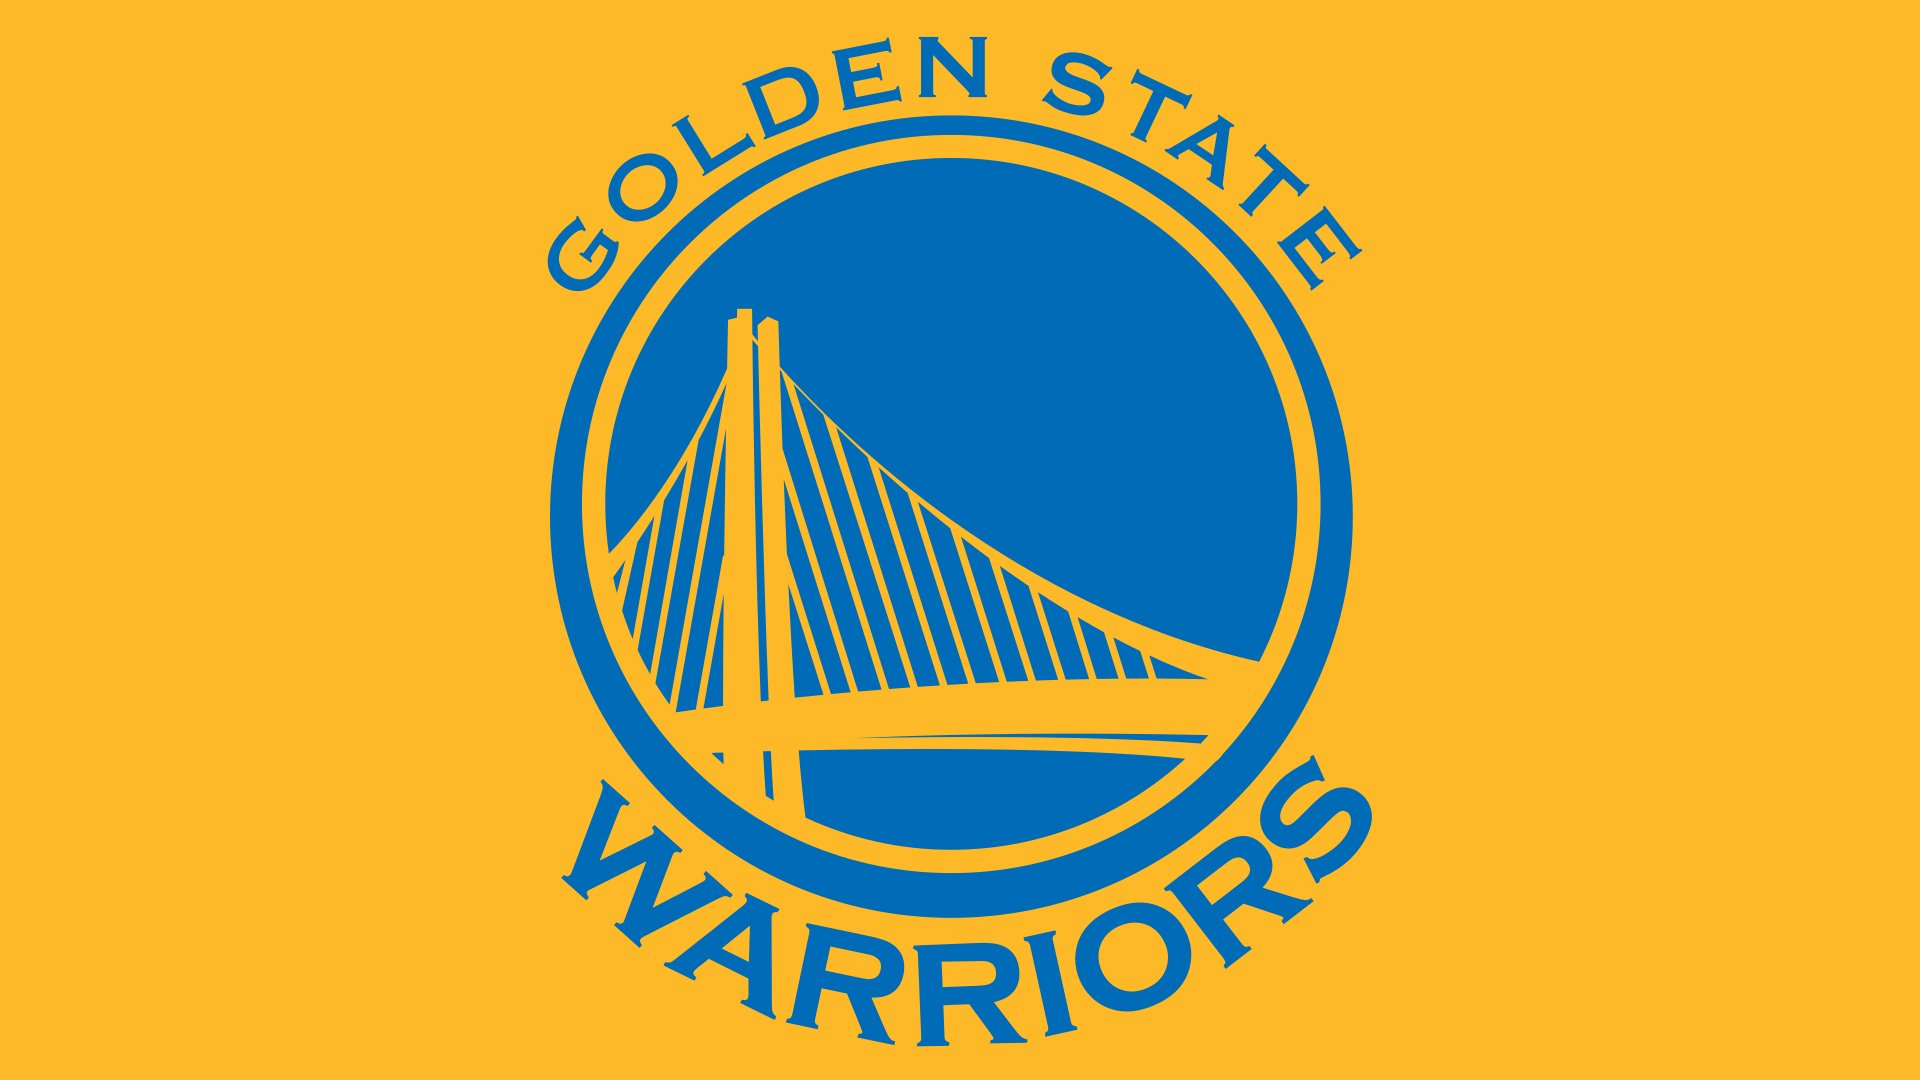 Golden State Warriors on X: The stripes The colors The history